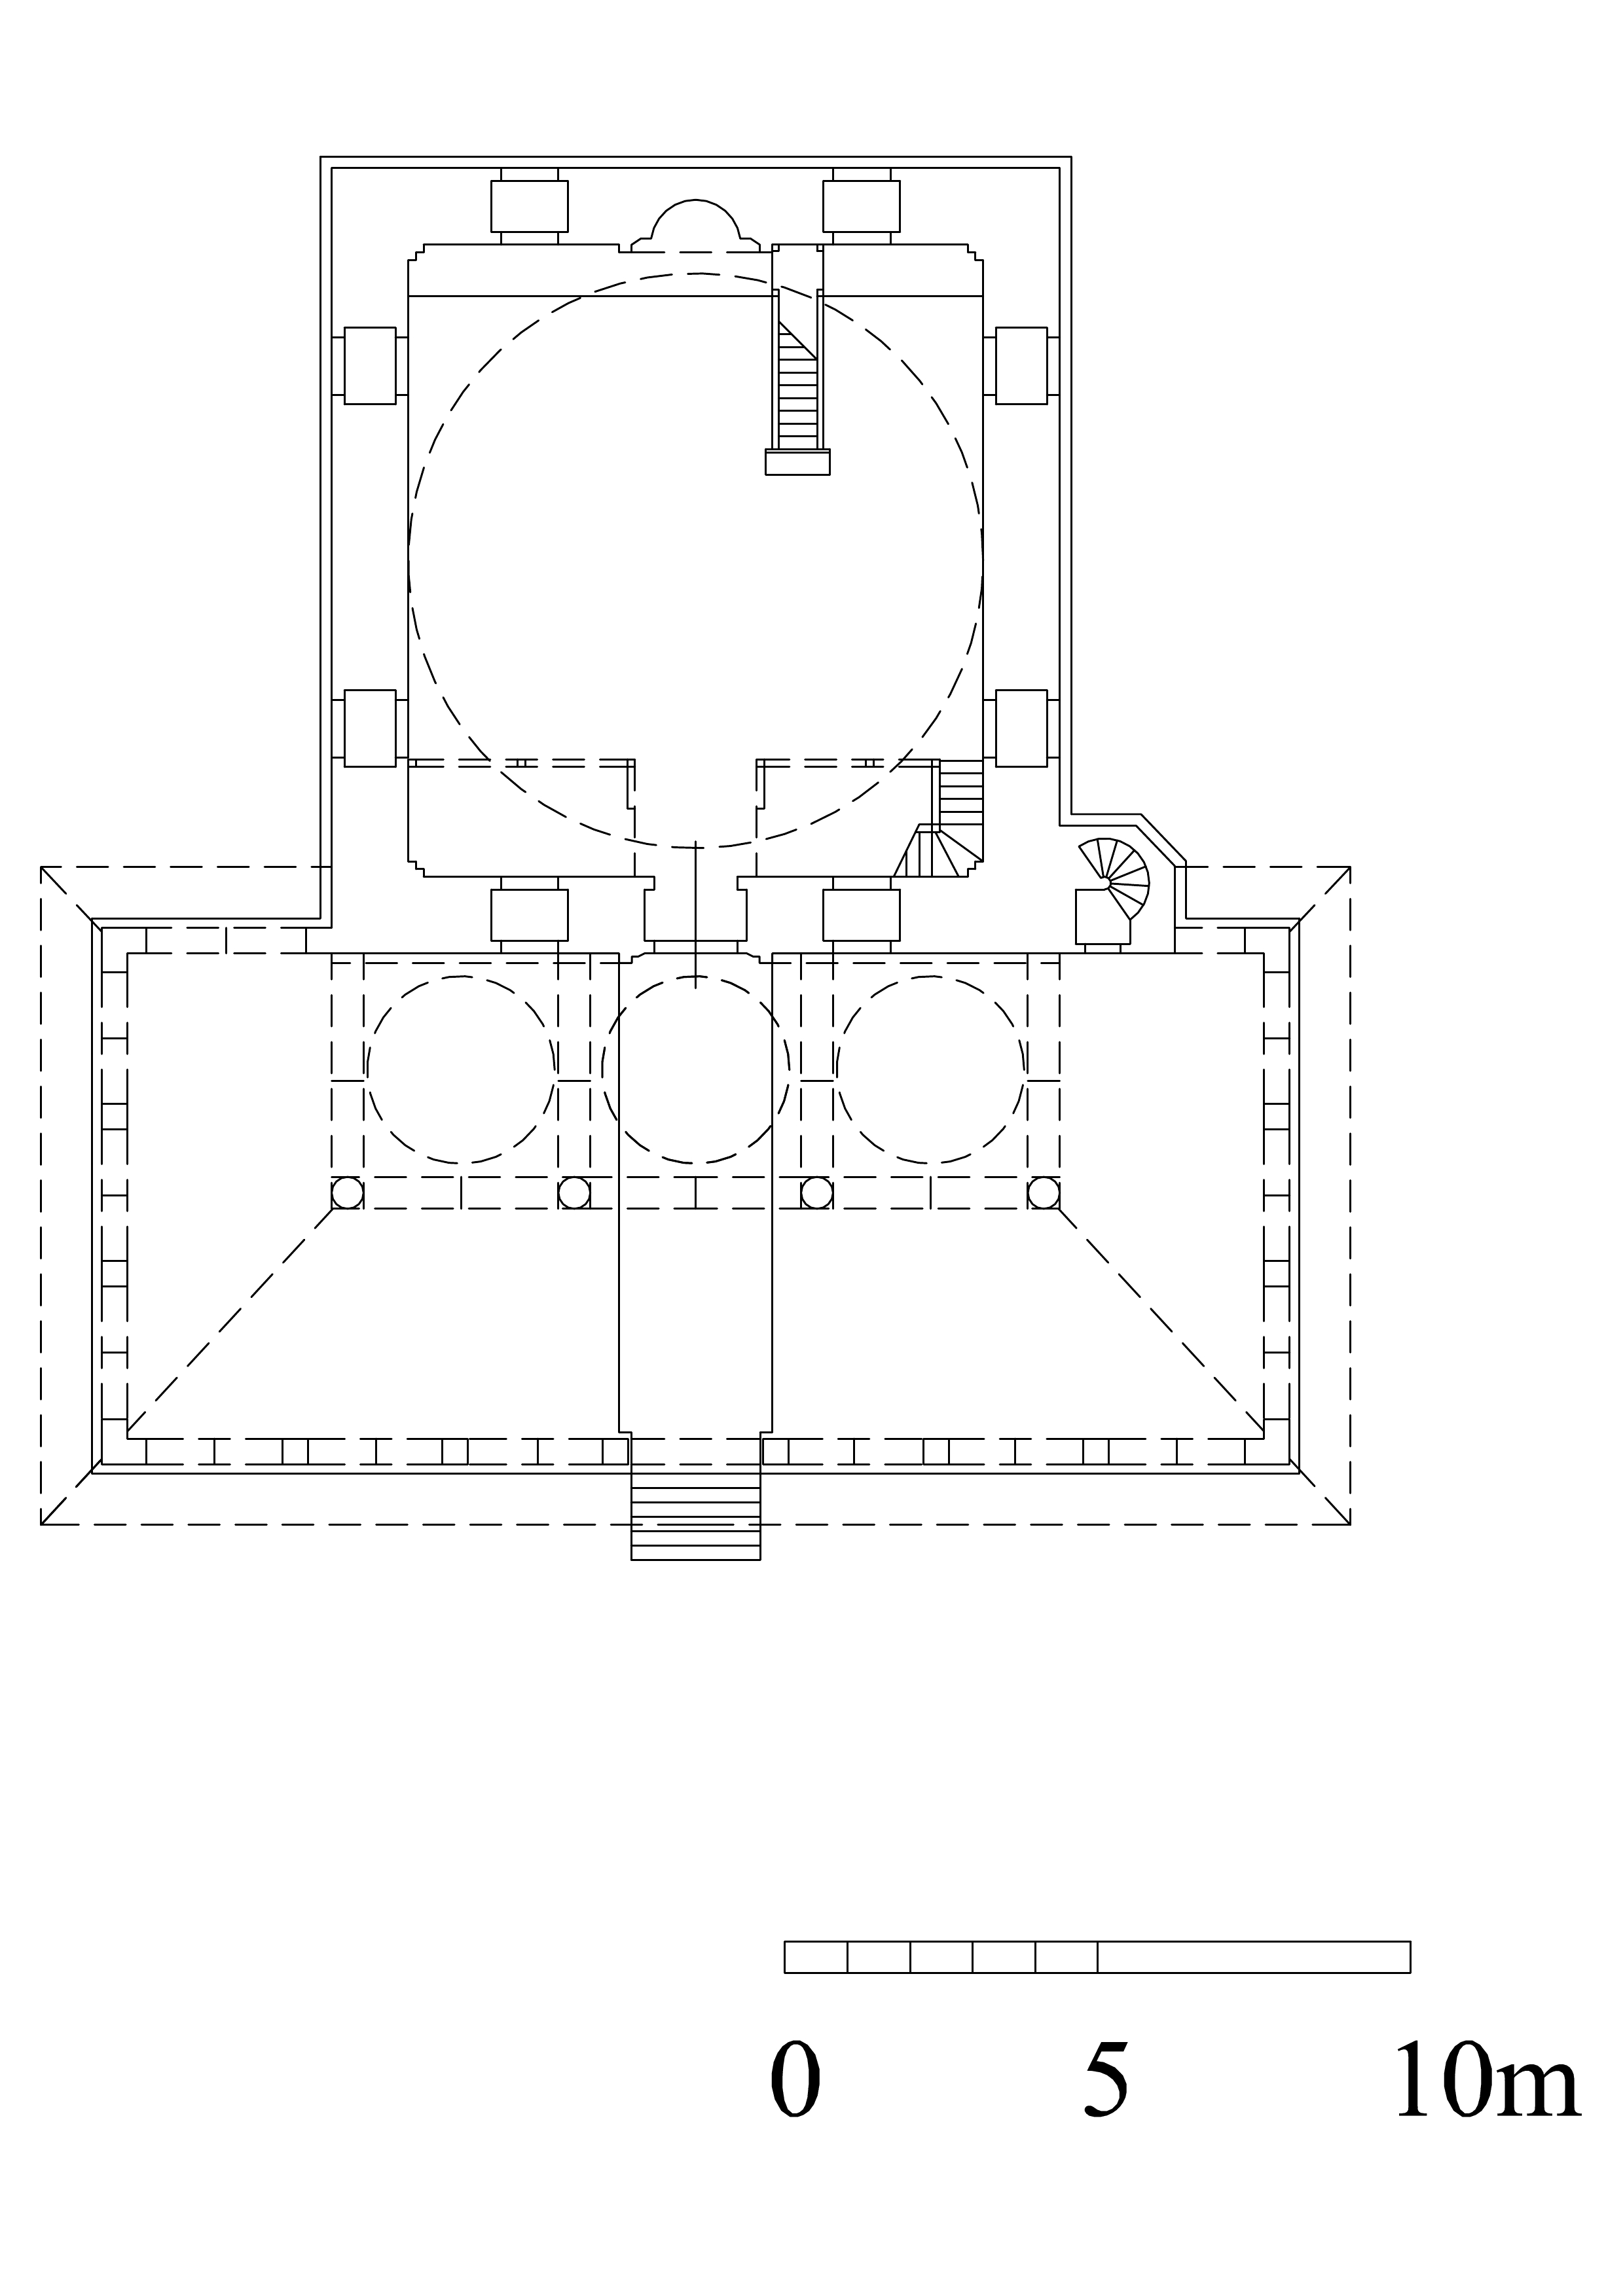  Damat Ferhat Paşa Camii - Floor plan. DWG file in AutoCAD 2000 format. Click the download button to download a zipped file containing the .dwg file.